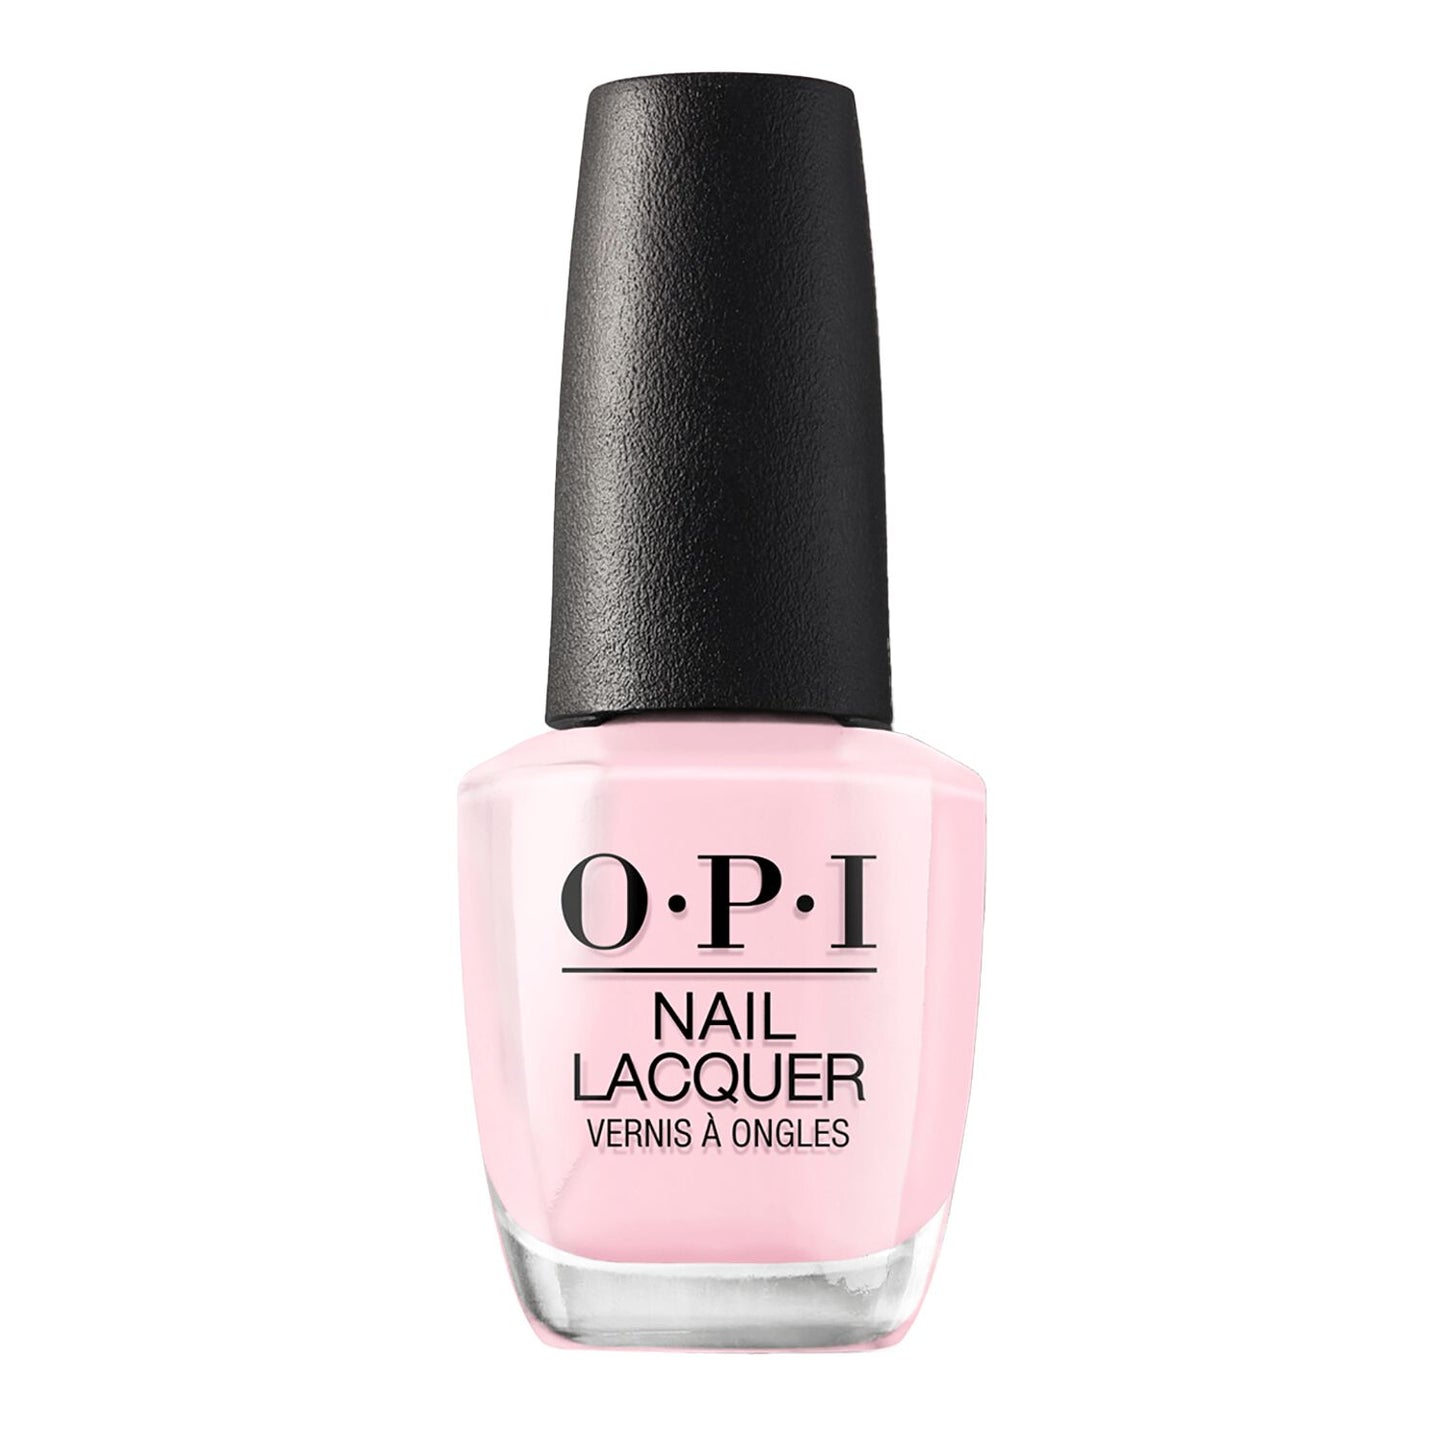 OPI Mod About You Nail Lacquer